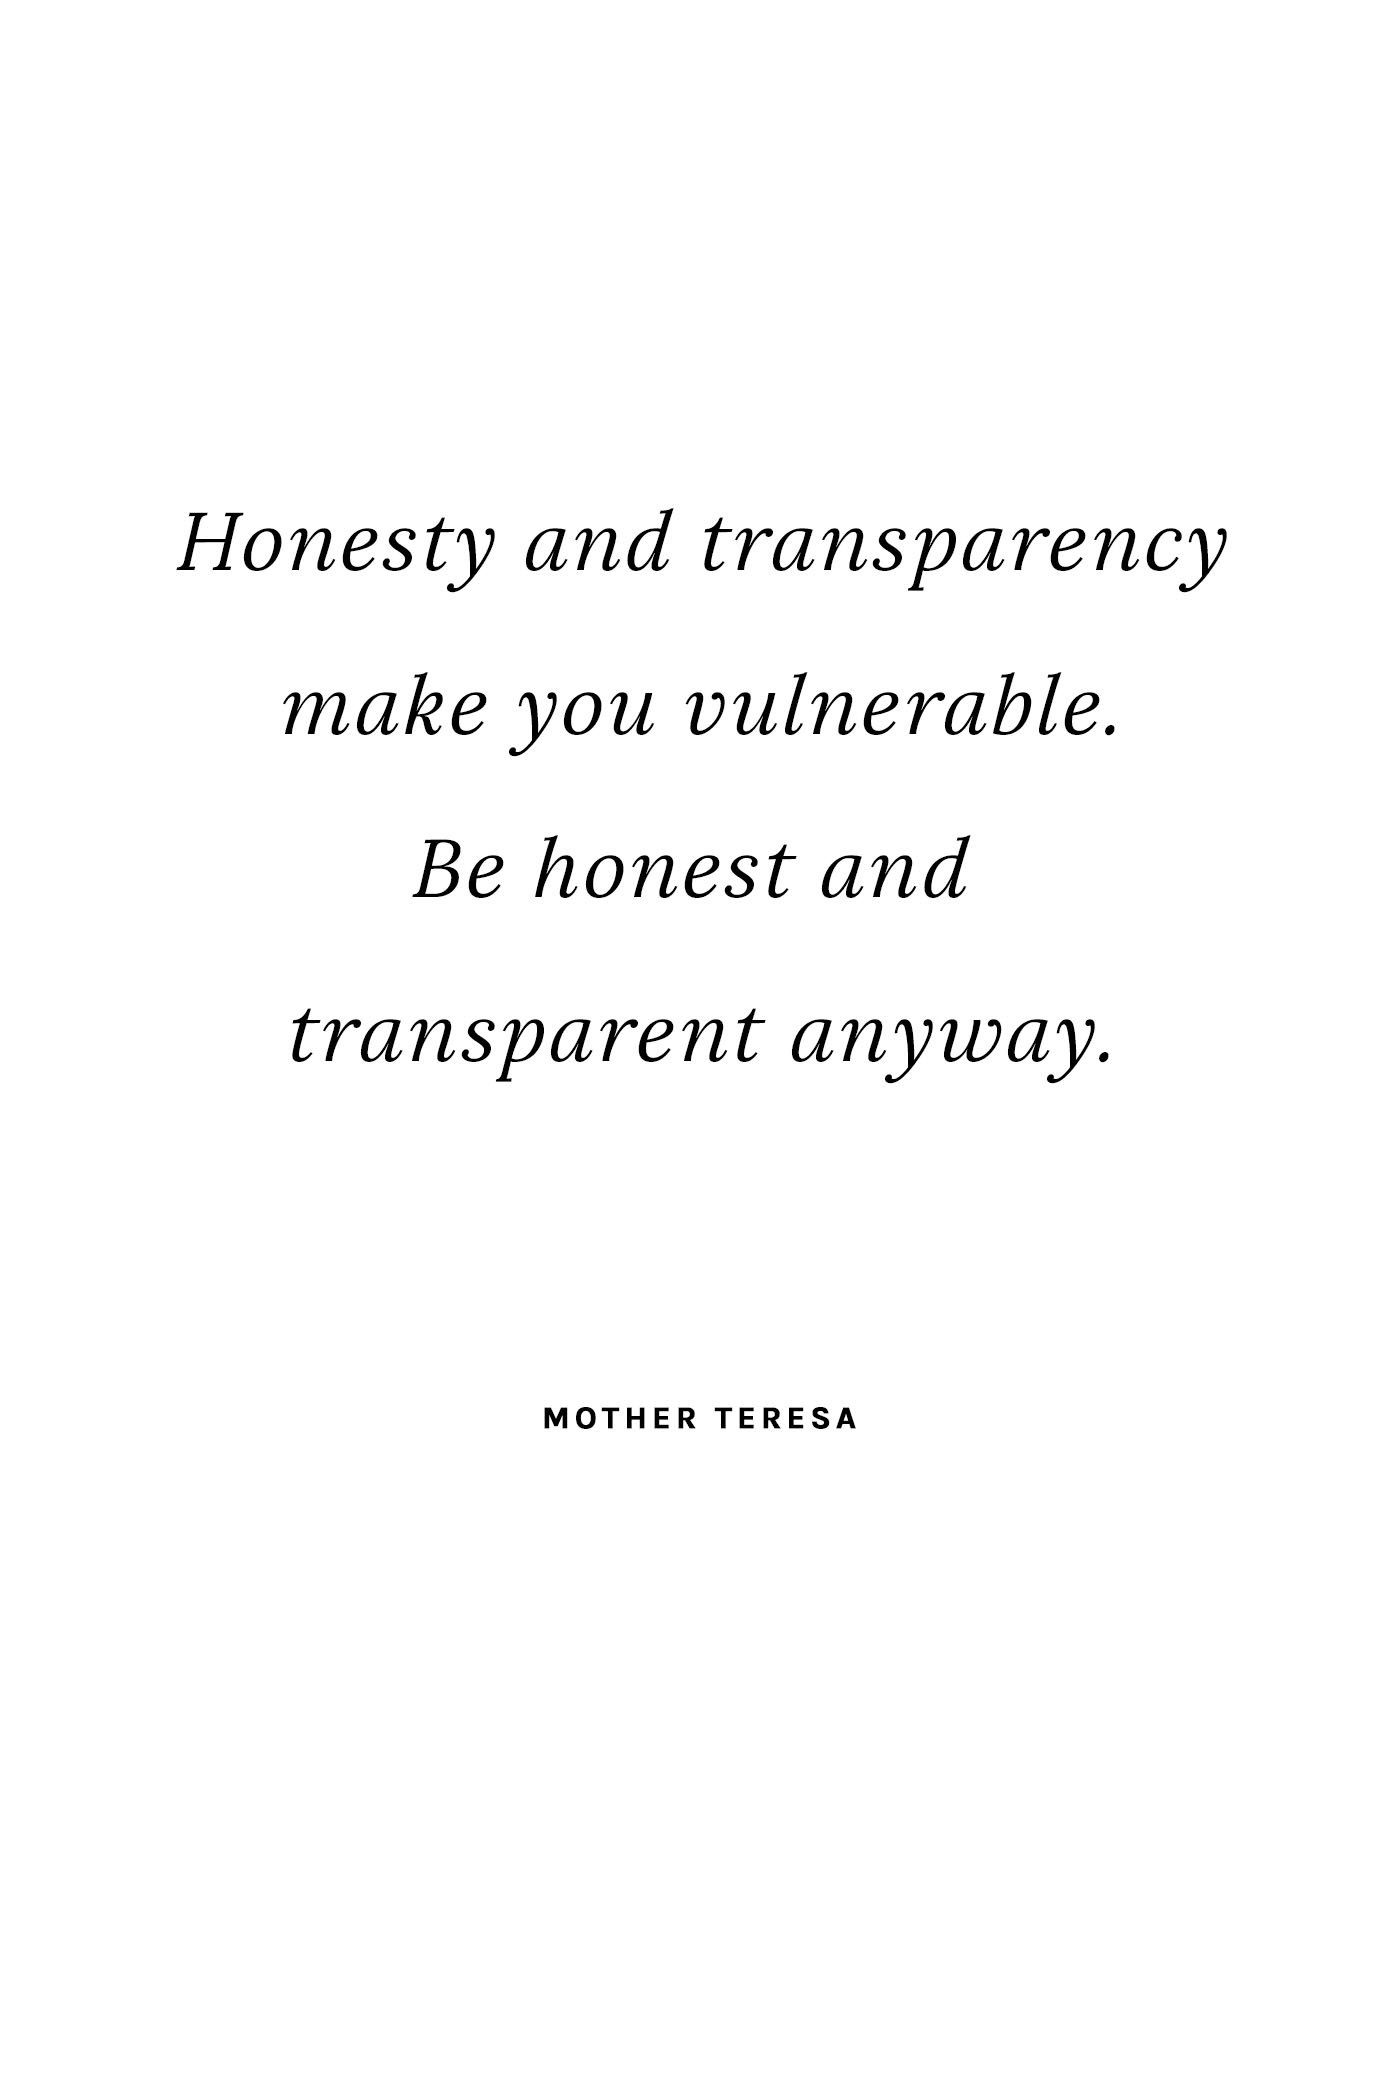 "Honesty and transparency make you vulnerable. Be honest and transparent anyway." - Mother Teresa - 5 Inspiring Quotes for a Positive Lifestyle on Hej Doll